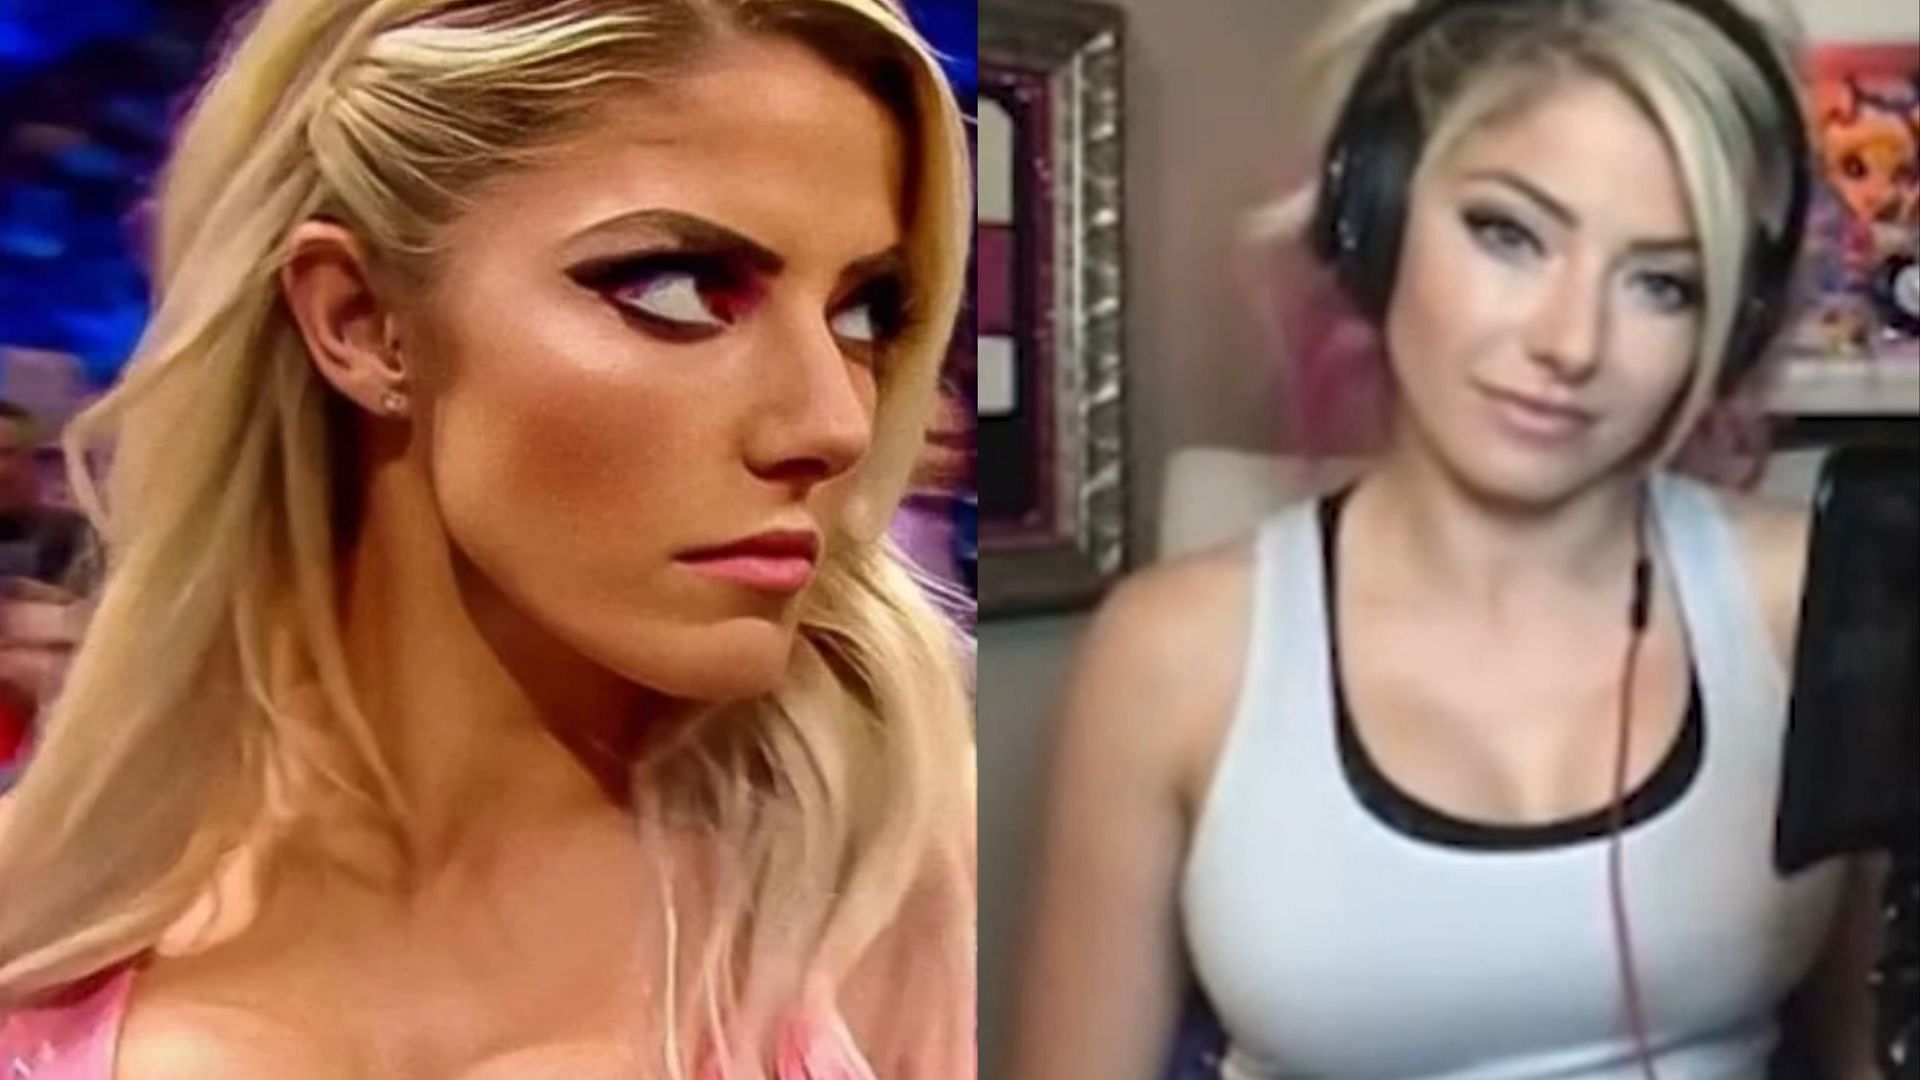 Alexa Bliss has been a fan favorite for a long time